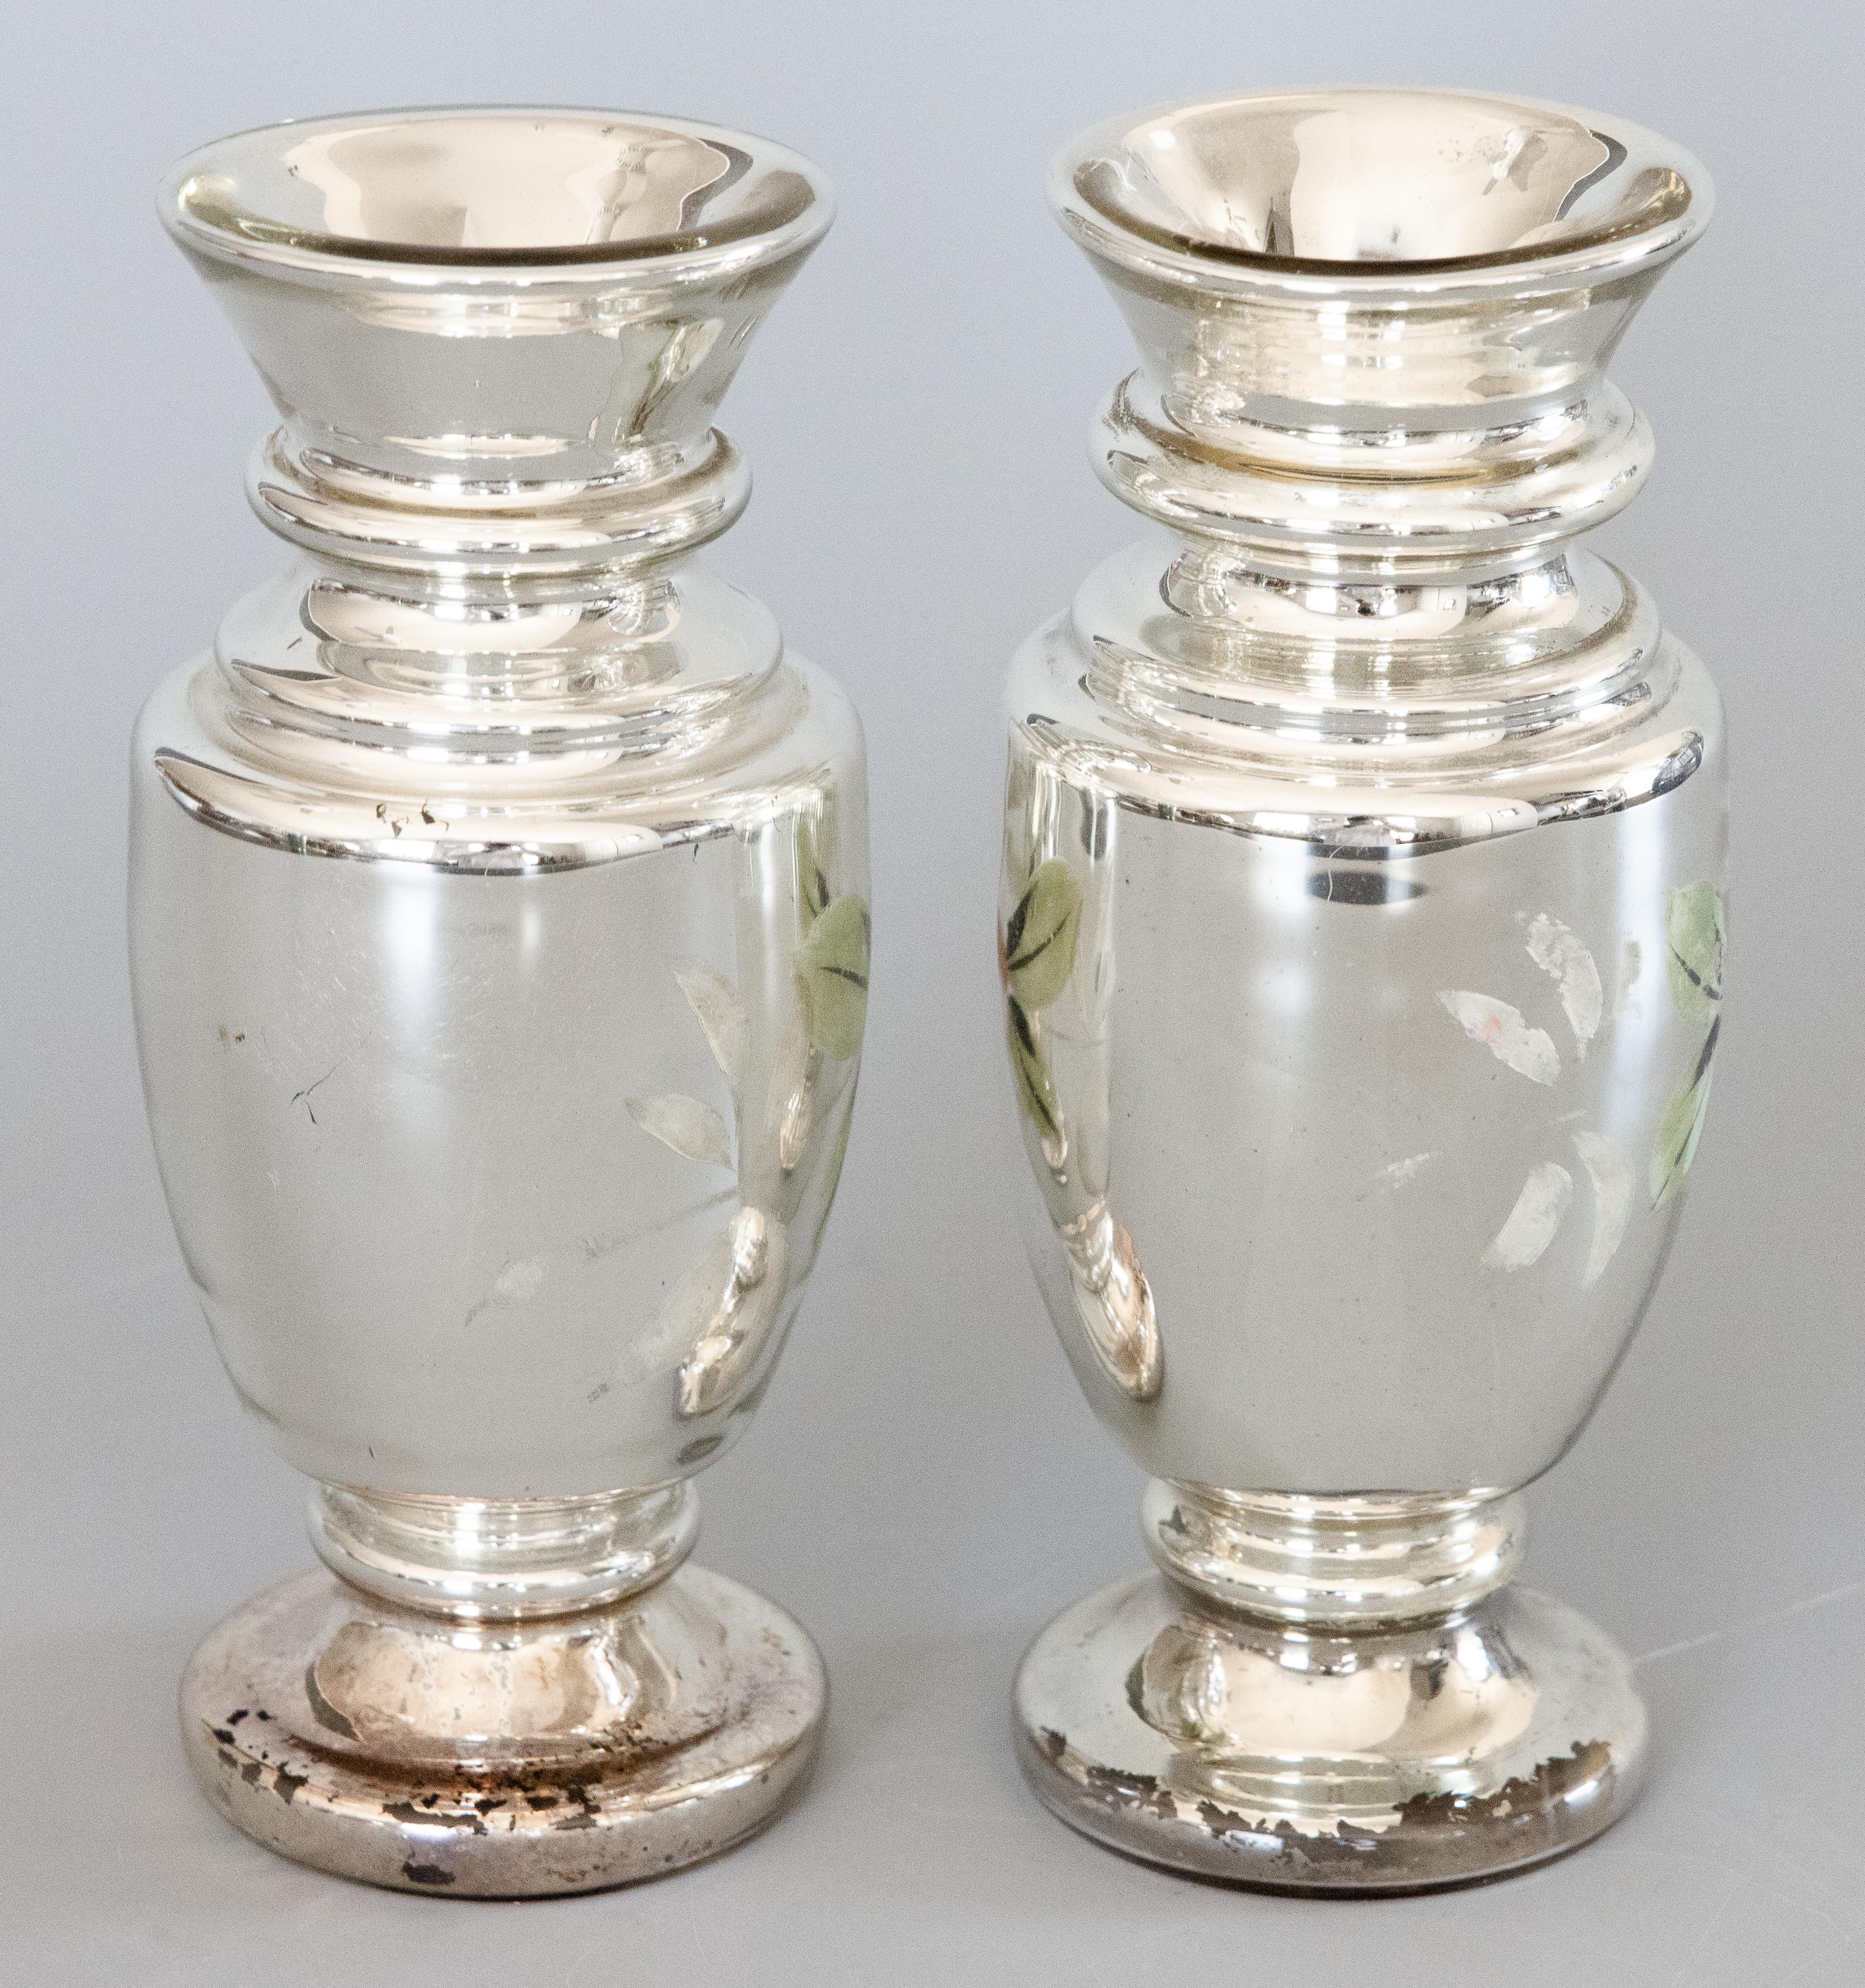 Pair of 19th Century English Silvered Mercury Glass Vases In Good Condition For Sale In Pearland, TX